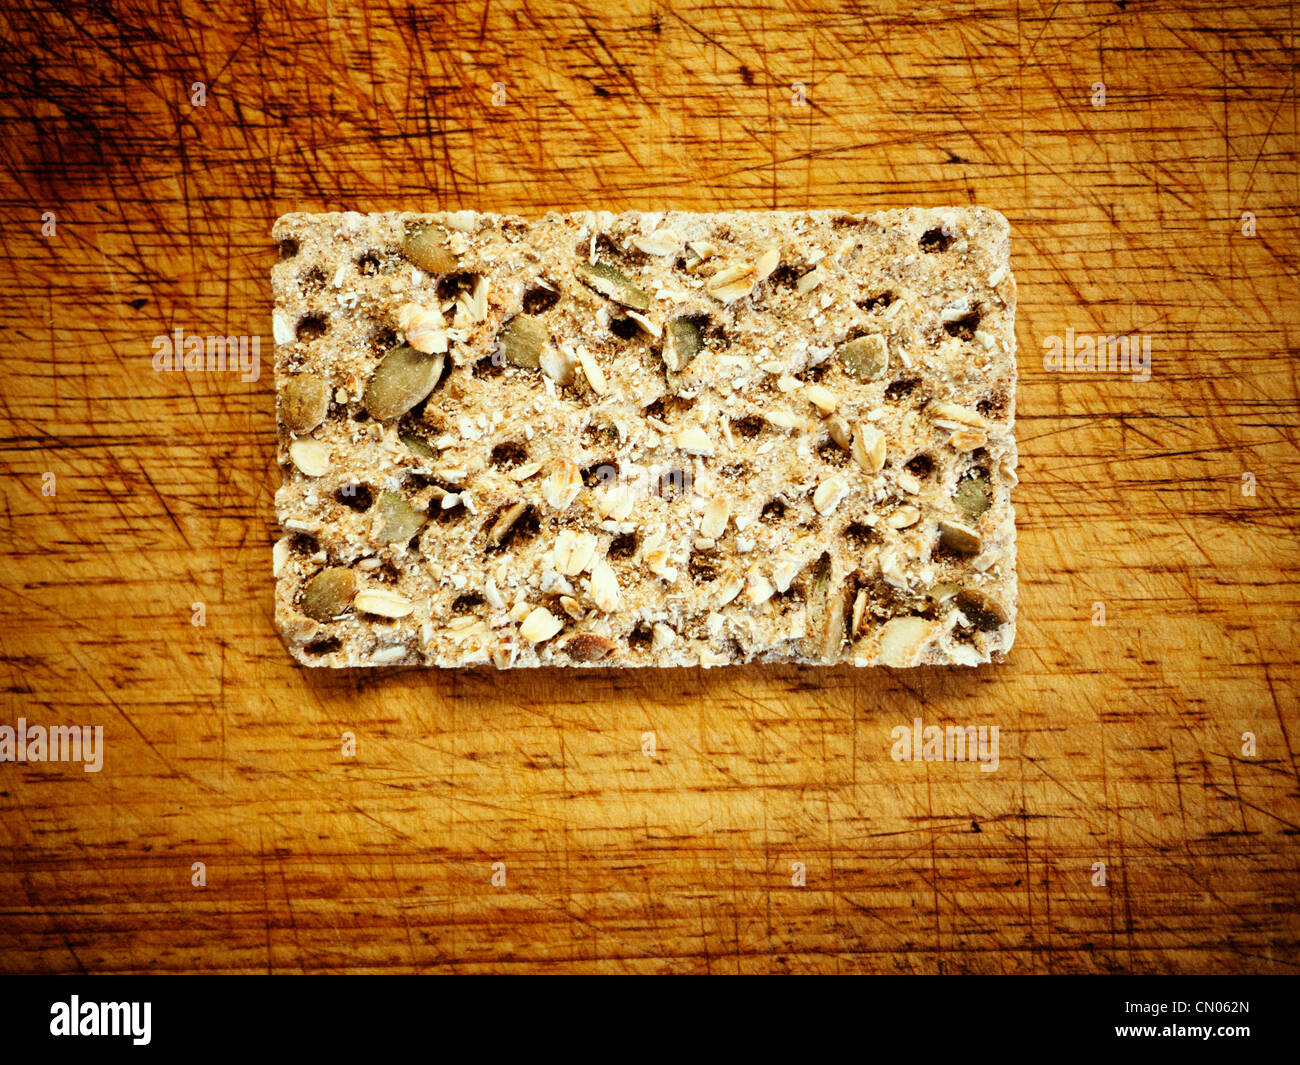 Savoury cracker biscuit with seeds on bread board. Stock Photo